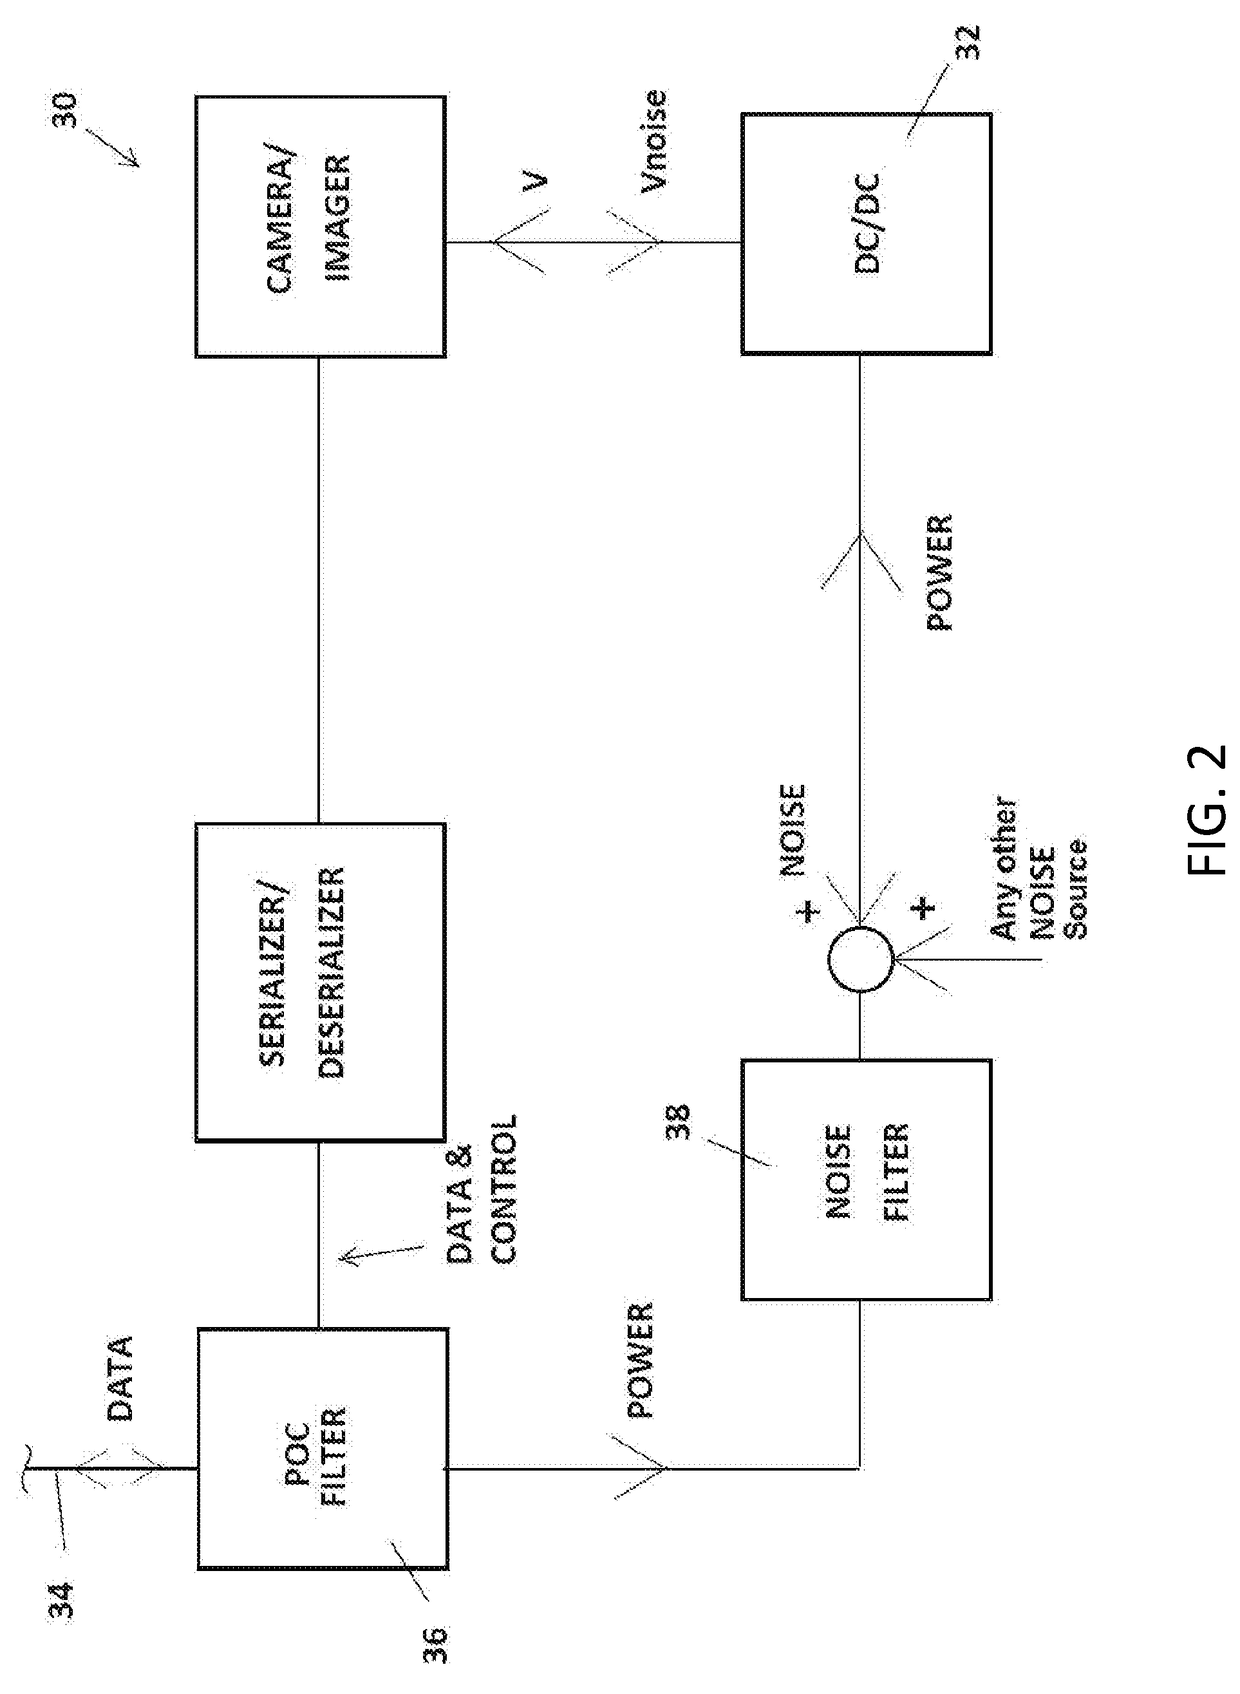 Vehicle vision system with camera line power filter